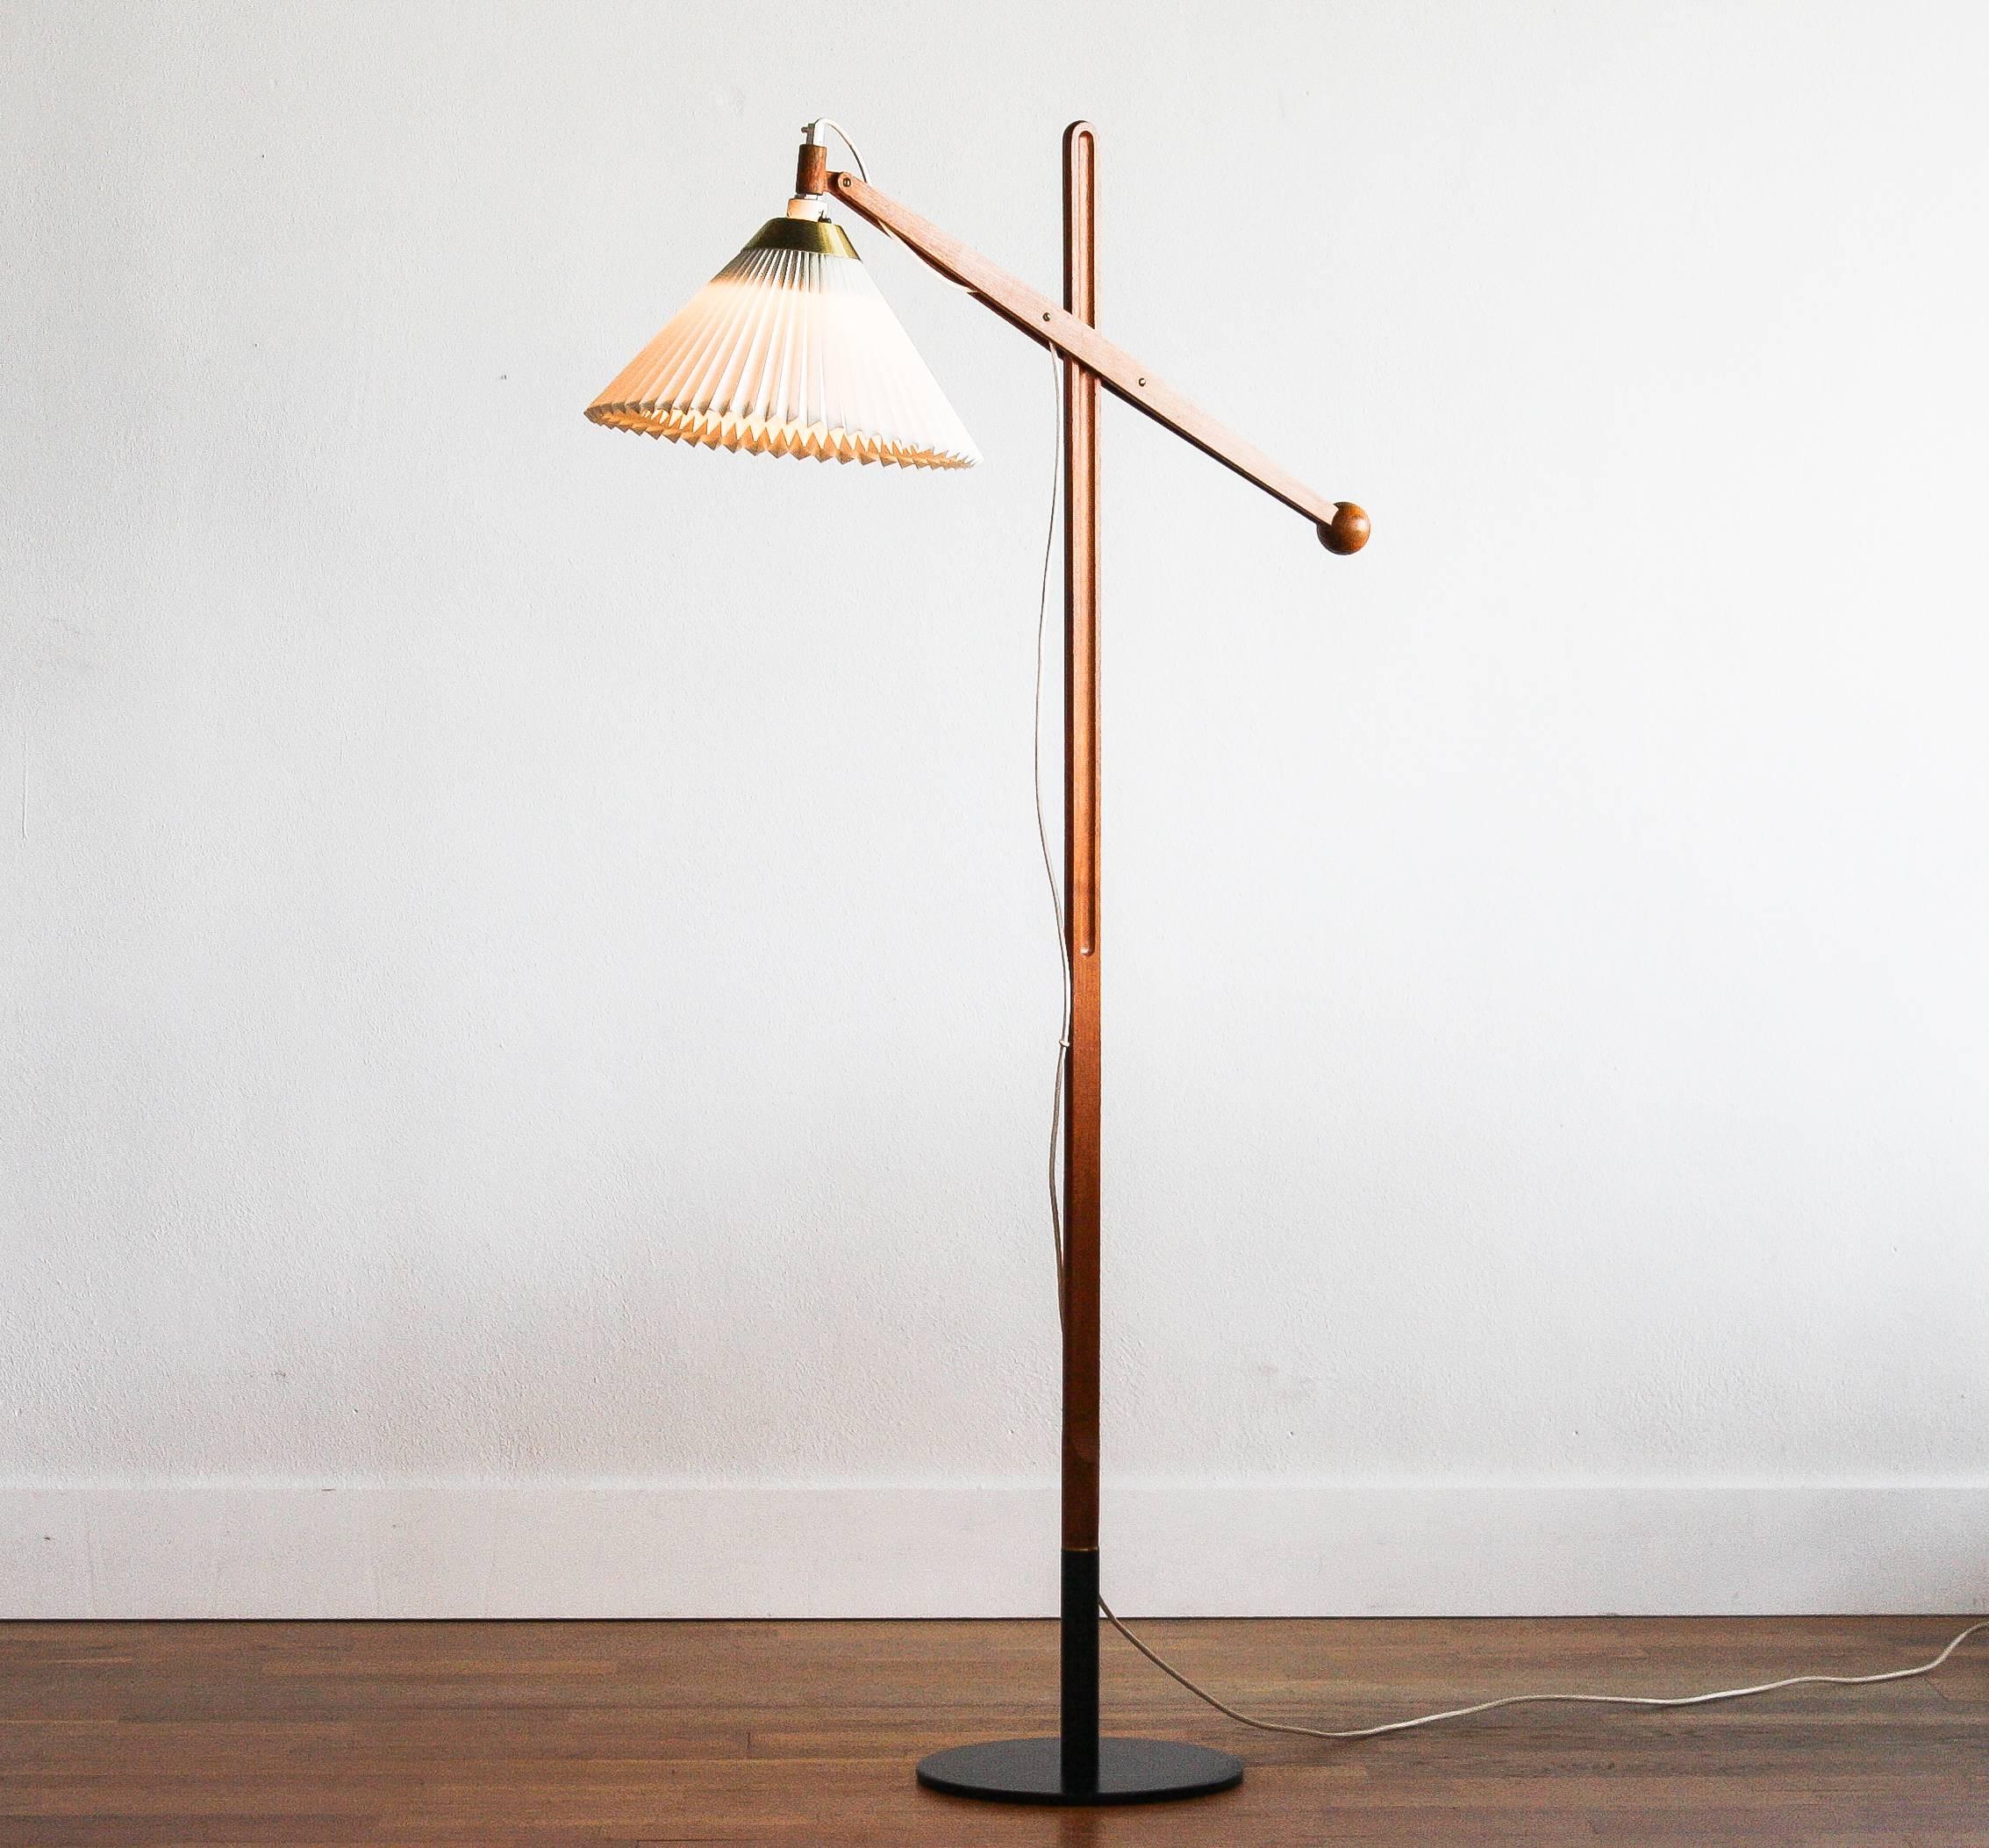 Extremely rare floorlamp in good condition.

Period; 1950-1959.

Model number 325.

Designed by Vilhelm Wohlert.

Produced by Le Klint (Denmark).

Measures: Height 150 cm.

